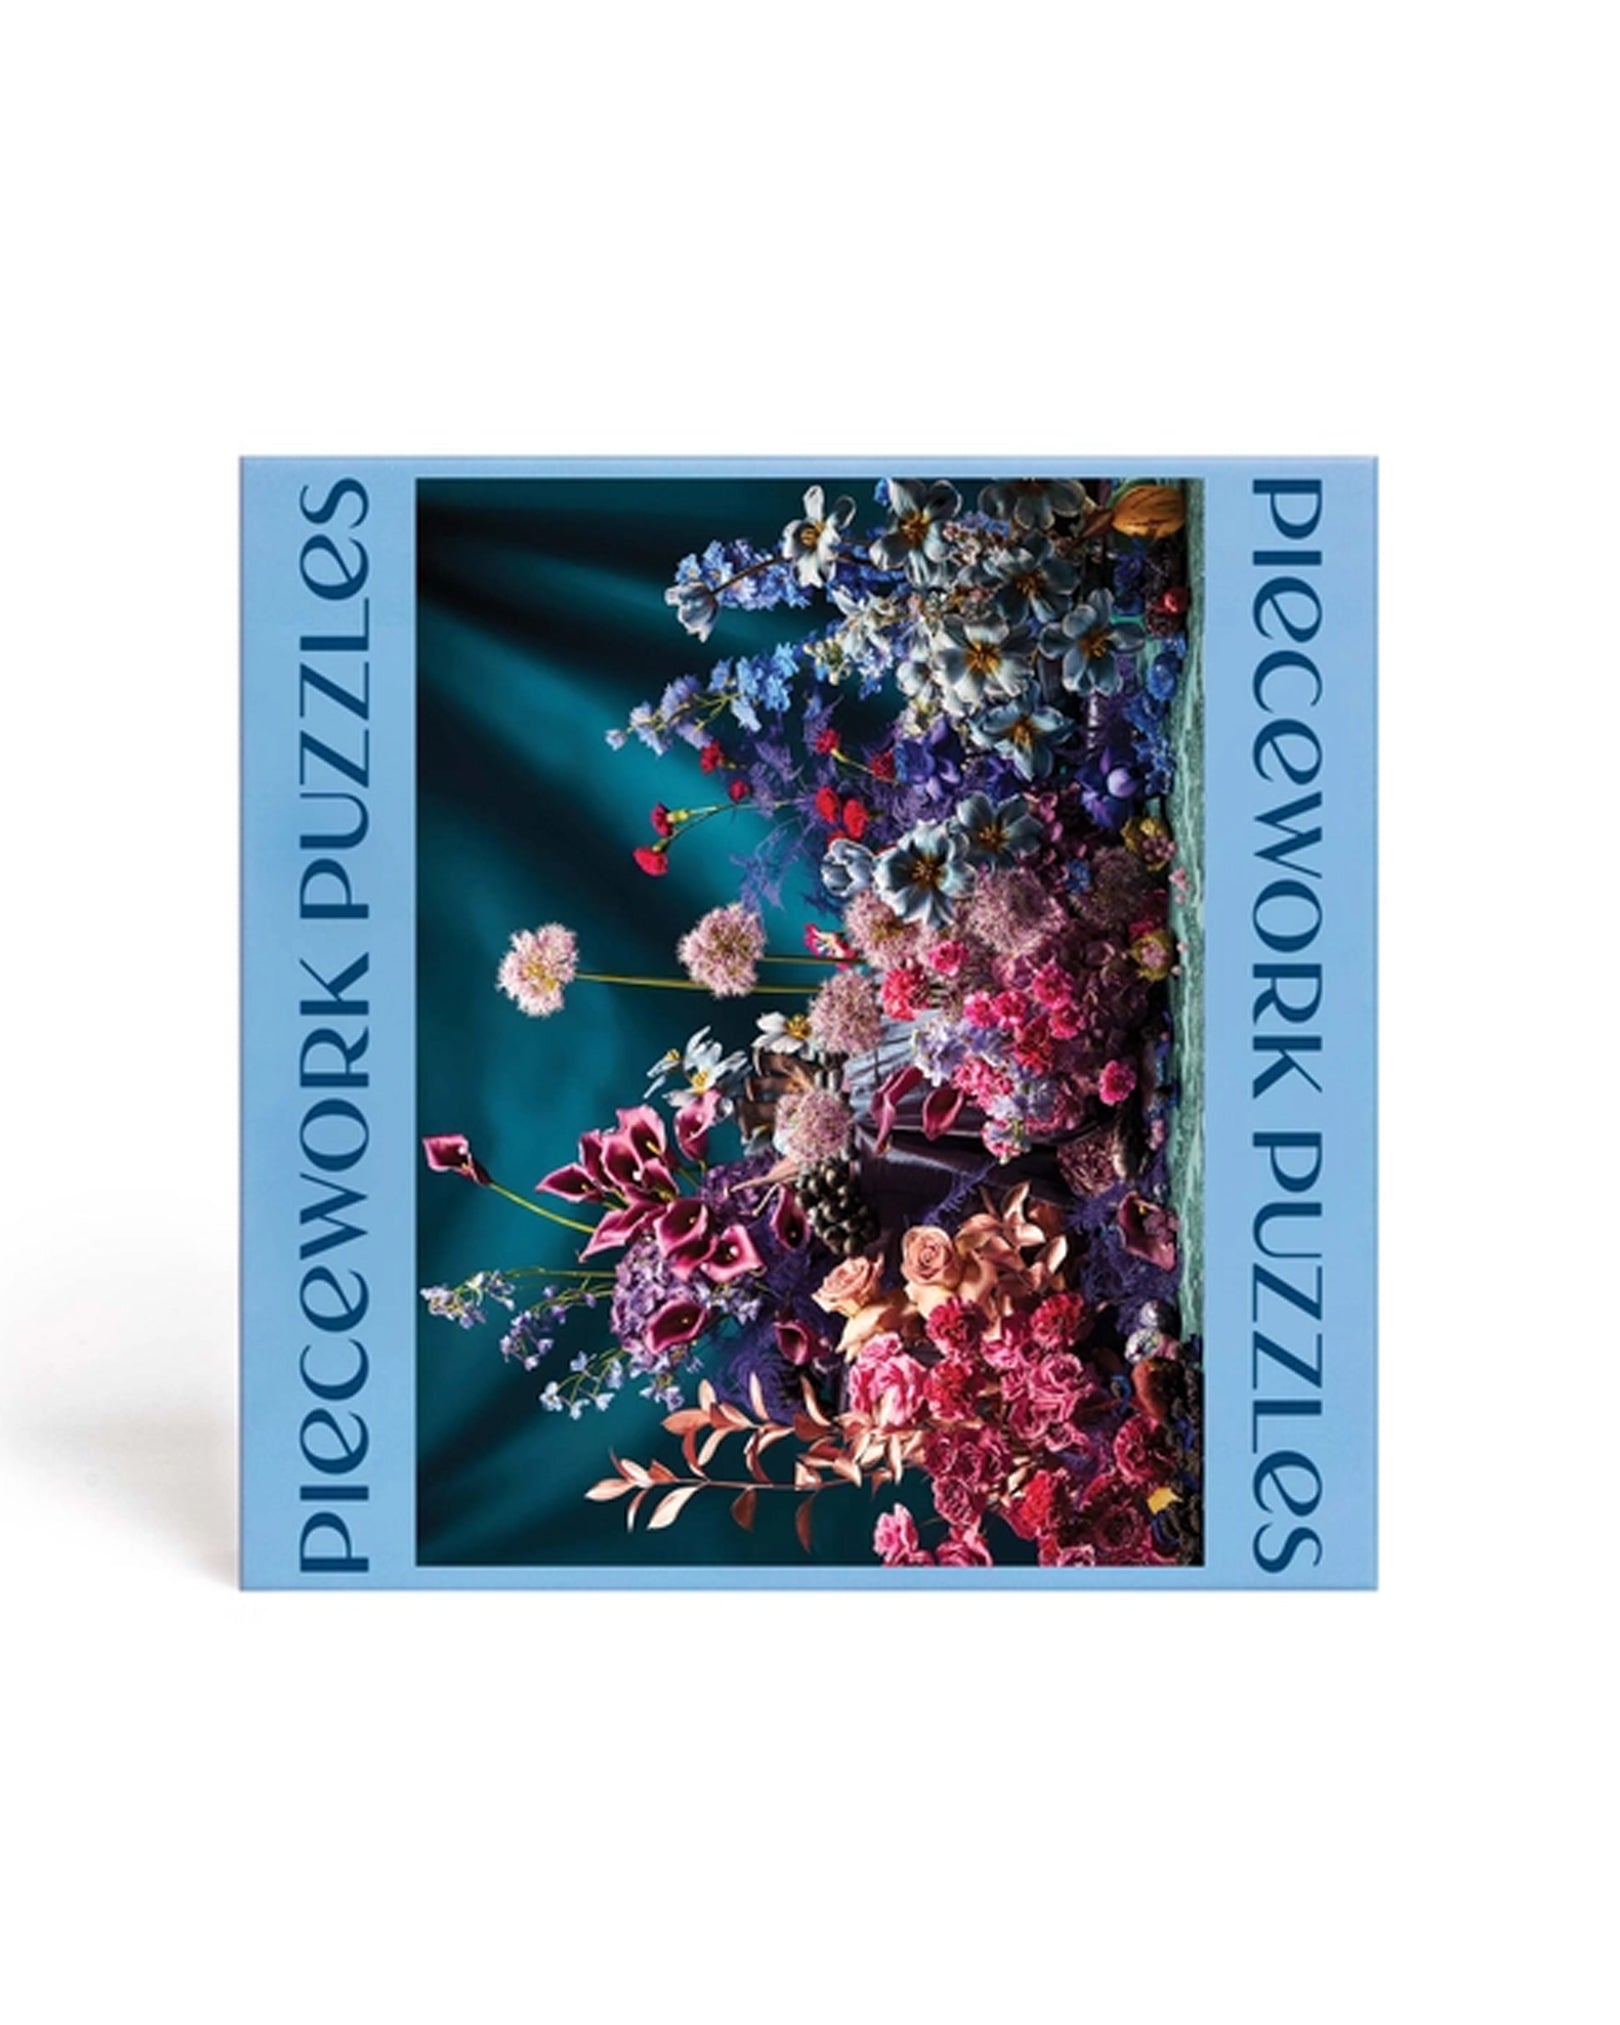 PIECEWORK 500 Piece Puzzle in Notes of Blue available at Lahn.shop